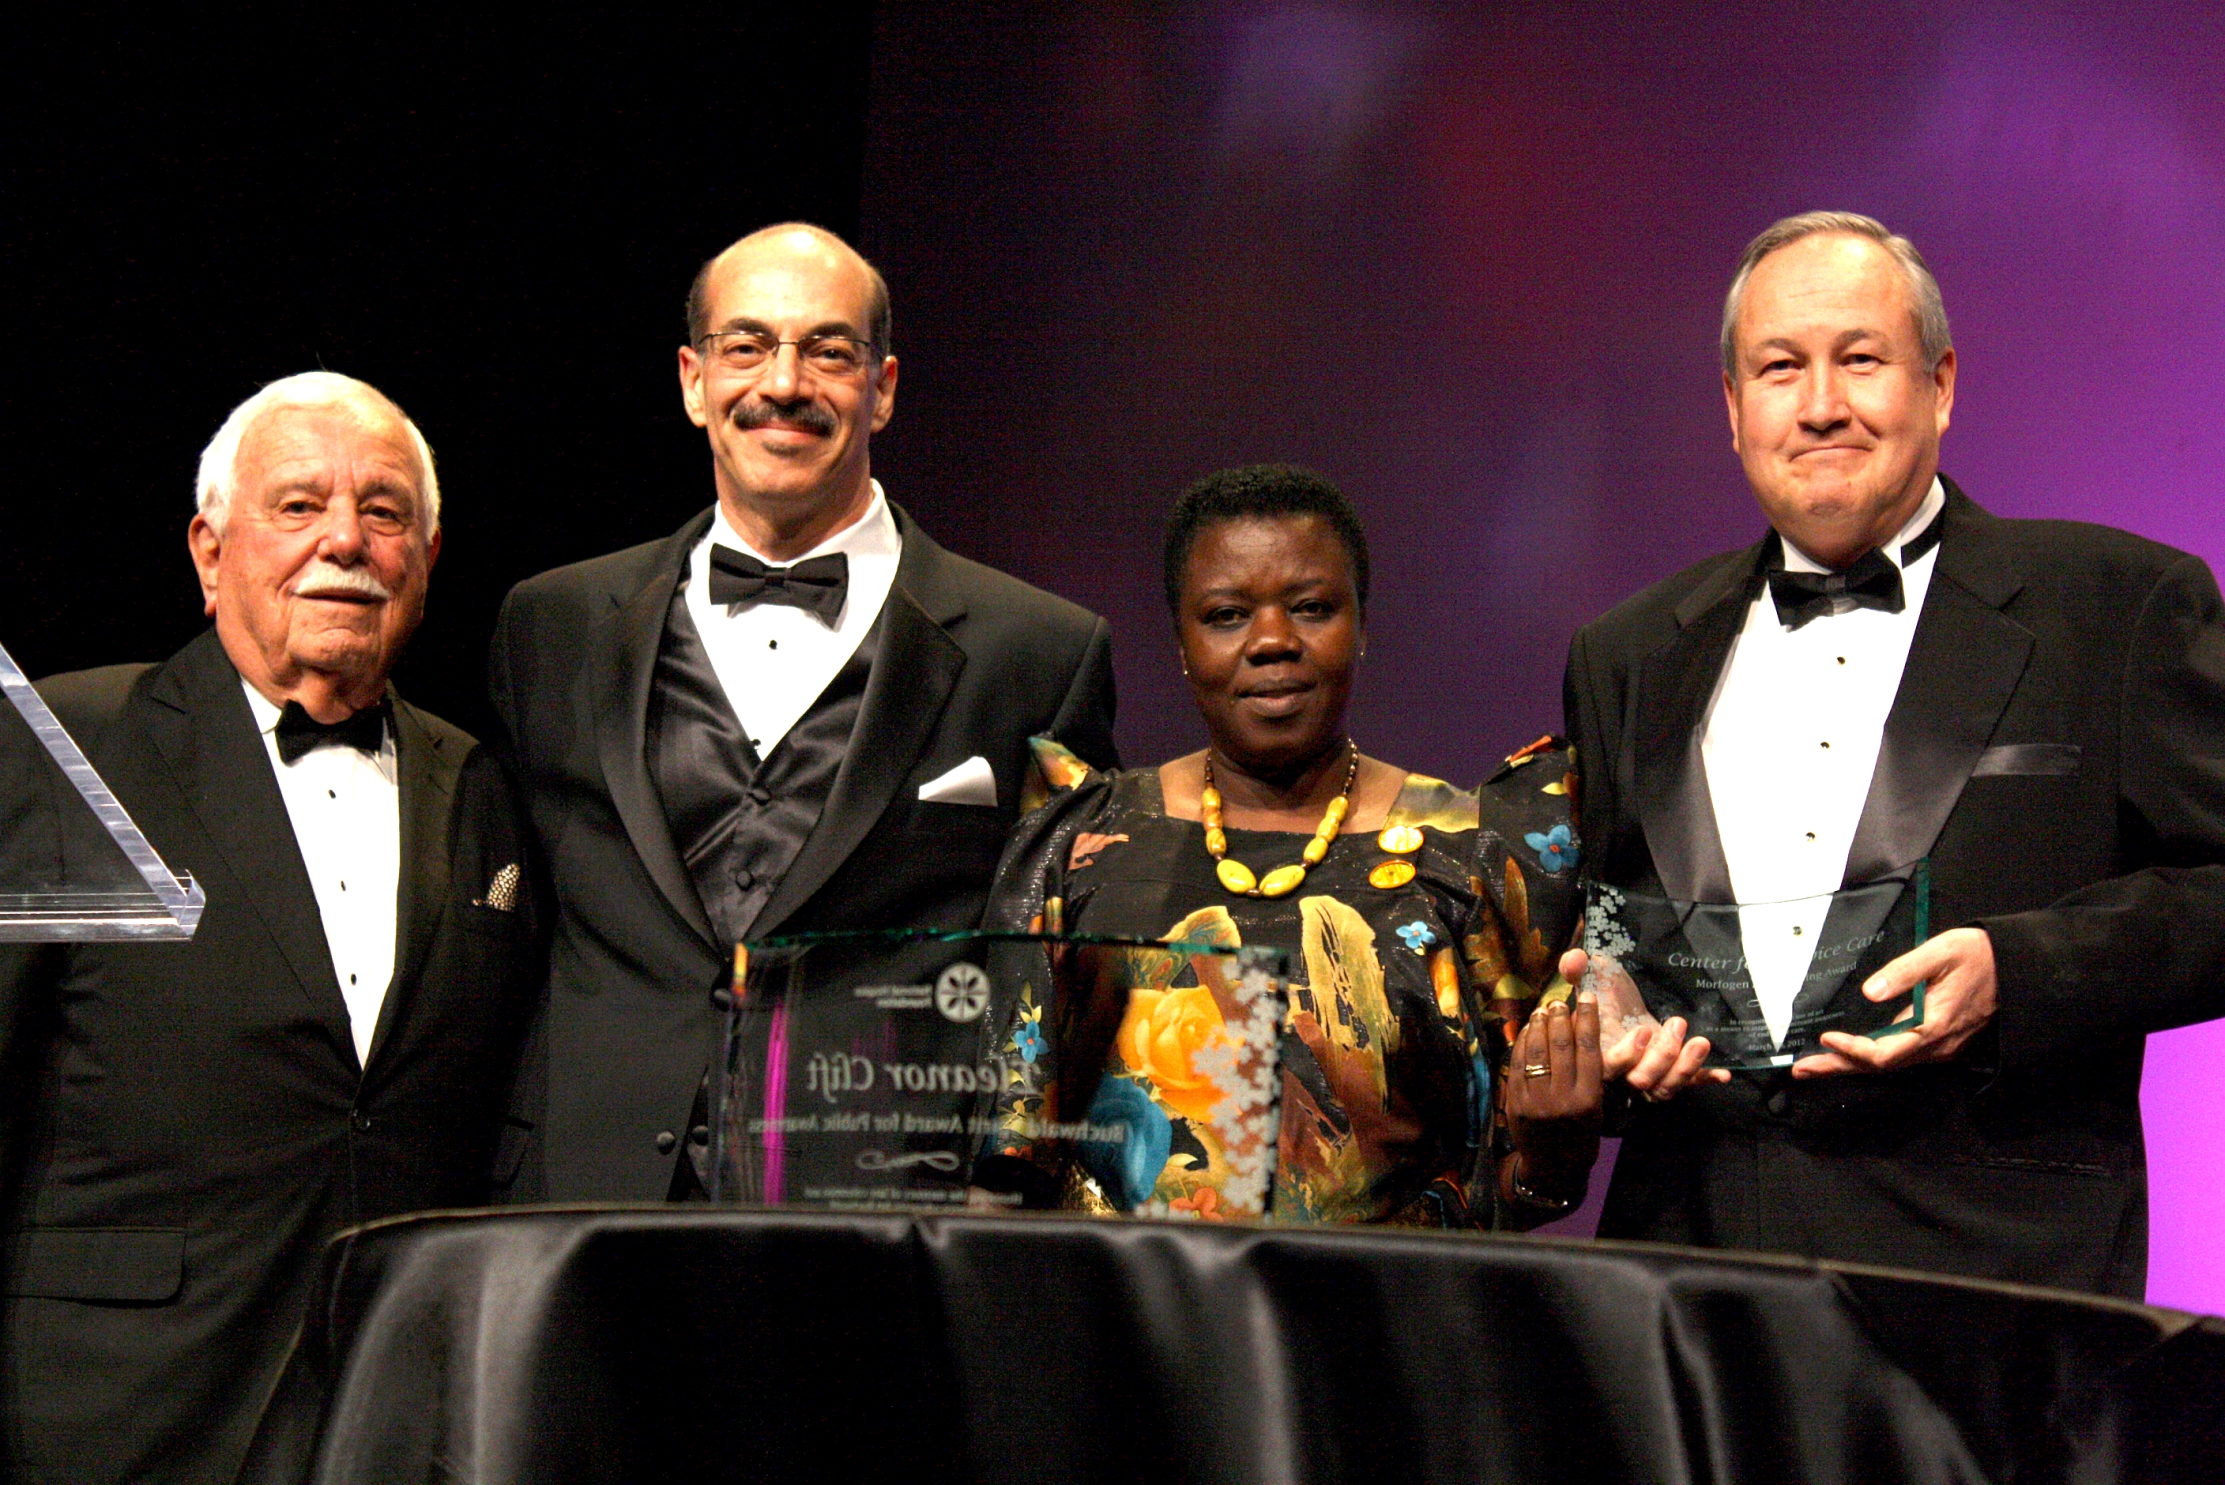 Pictured with Zach Morfogen, John Mastrojohn and Rose Kiwanuka accepting the Morfogen Art of Caring Award at the 2012 National Hospice Foundation Gala.